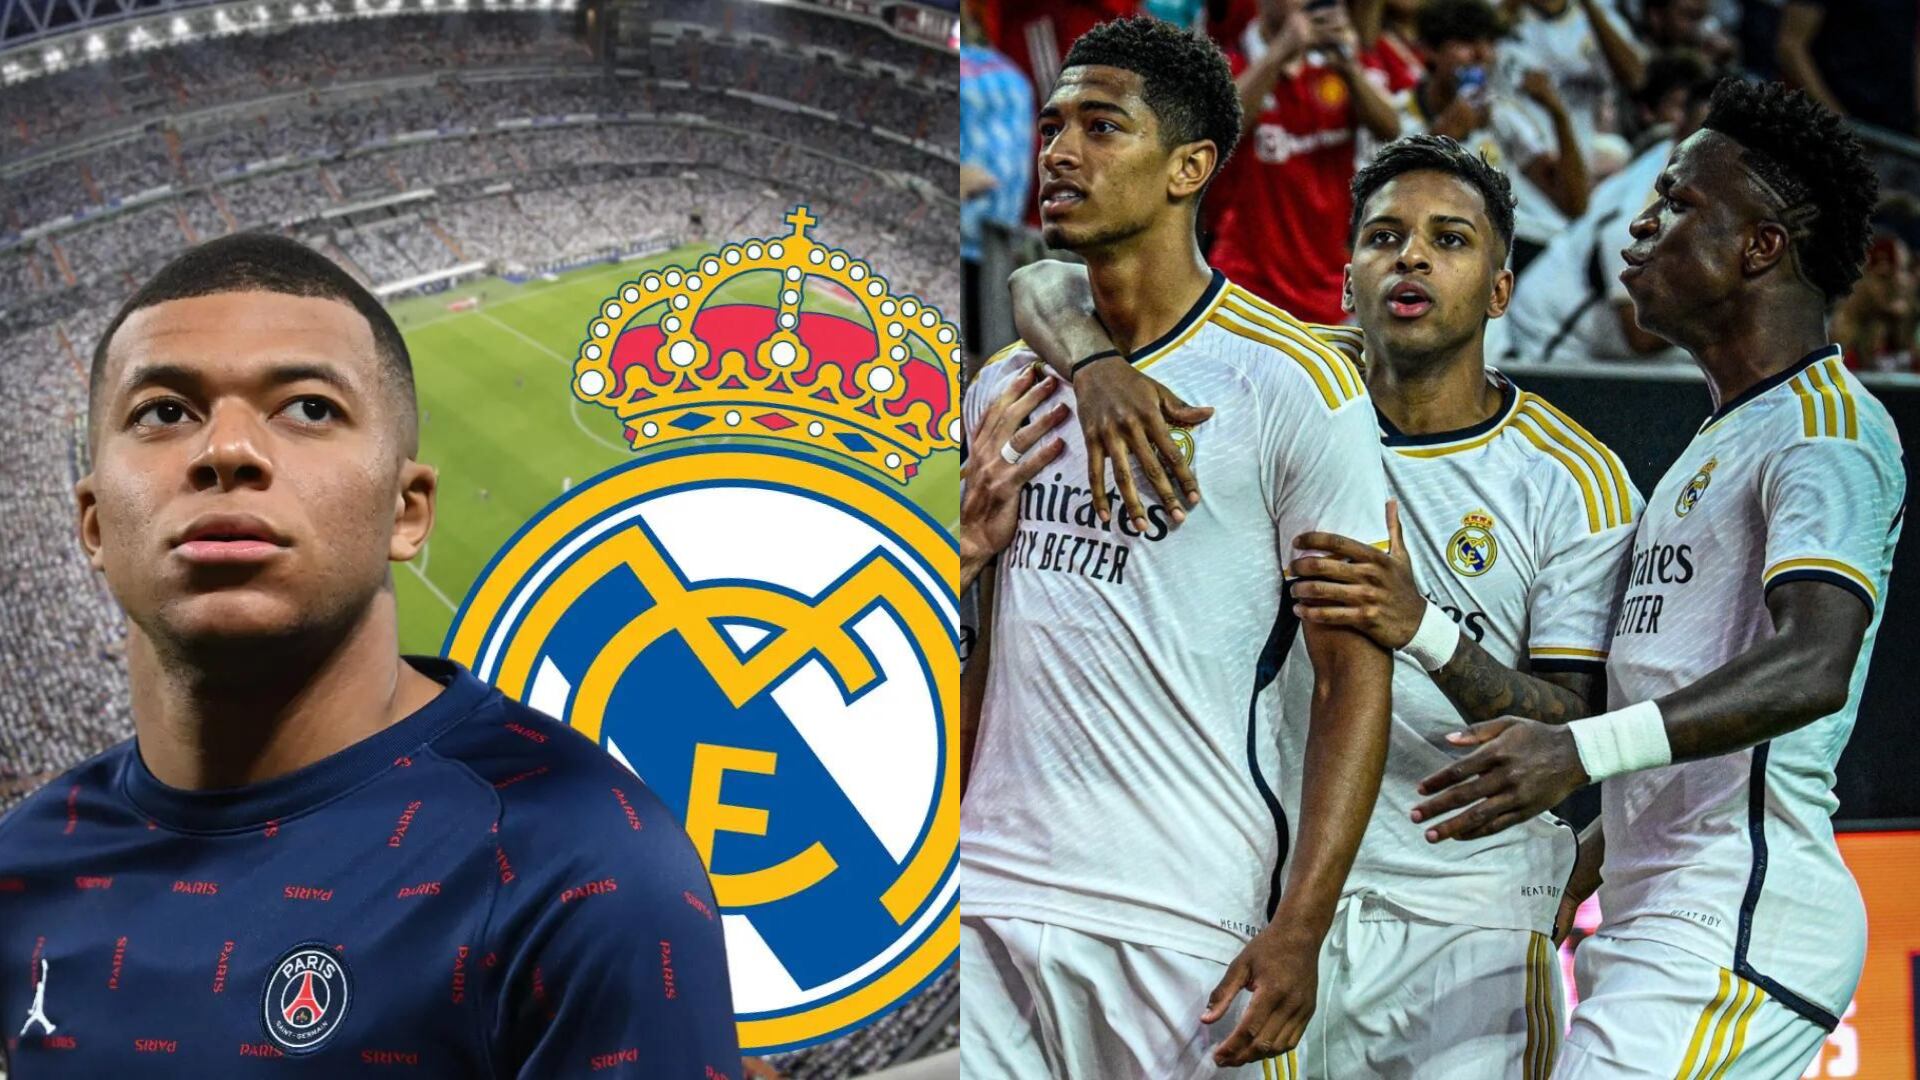 Mbappe will get $50M from Real Madrid, and this is the $130M star they'll sell